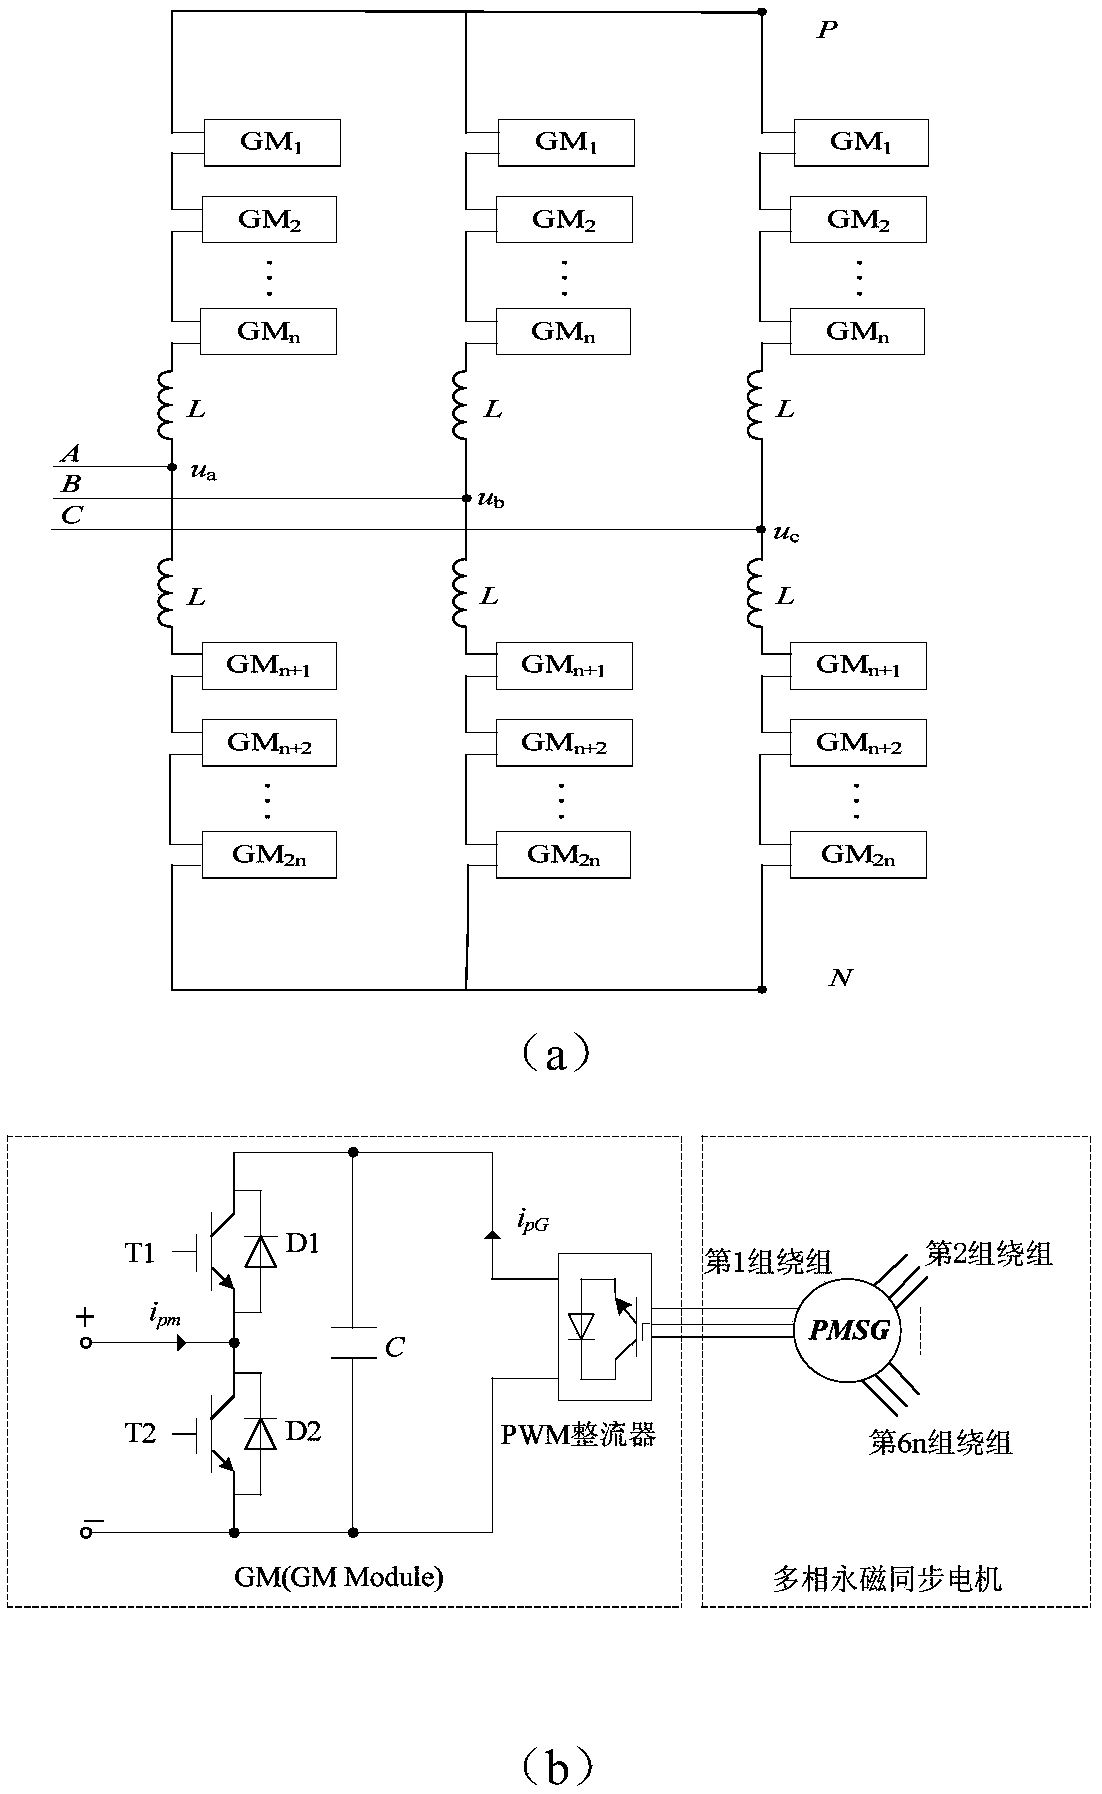 A multi-phase permanent magnet synchronous motor drive system and its control method